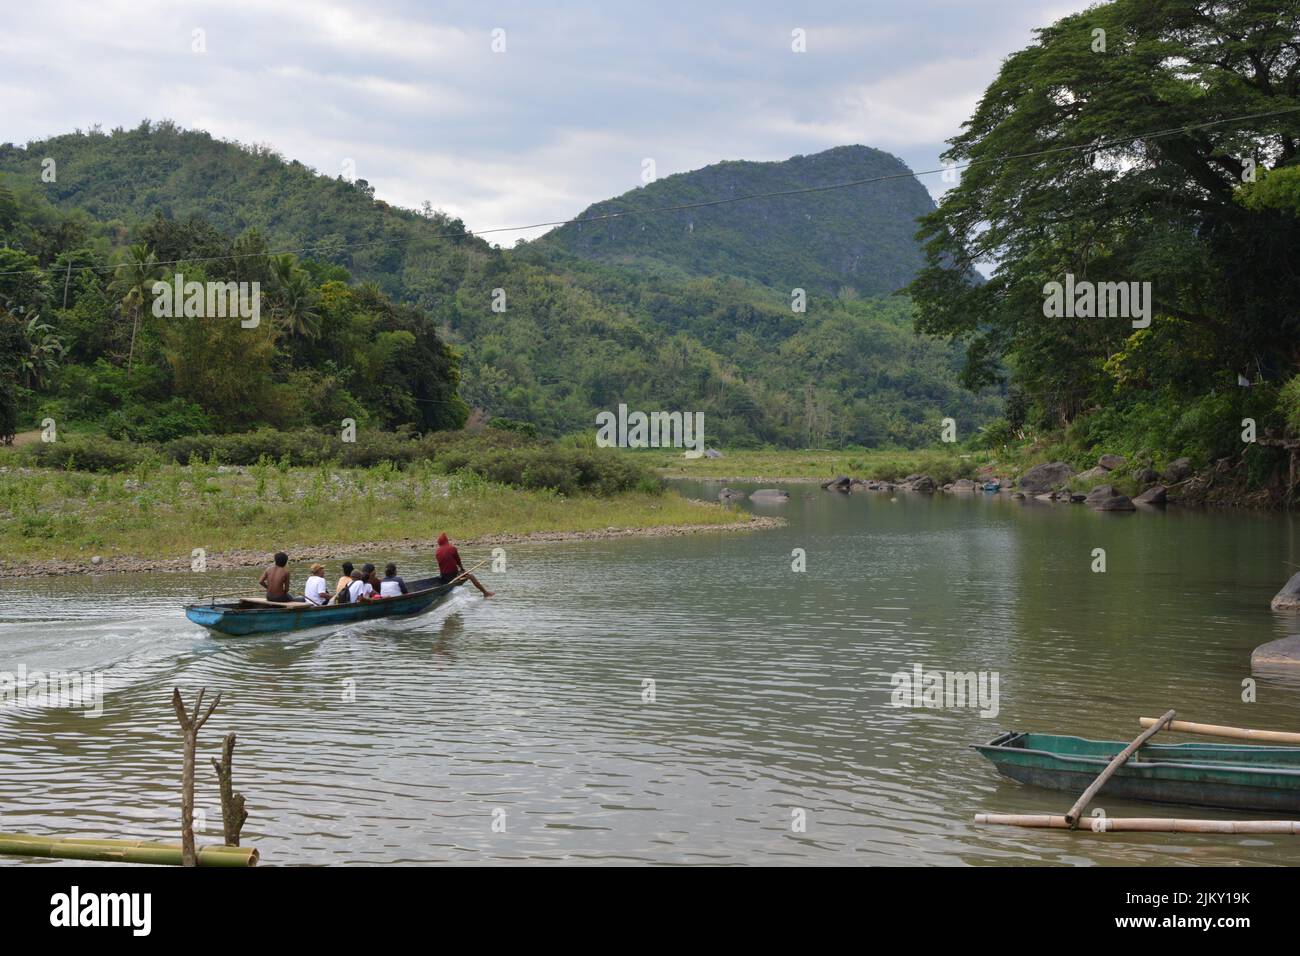 A scenic shot of several people travelling down the Wawa River, Rizal, Philippines on a blue boat Stock Photo